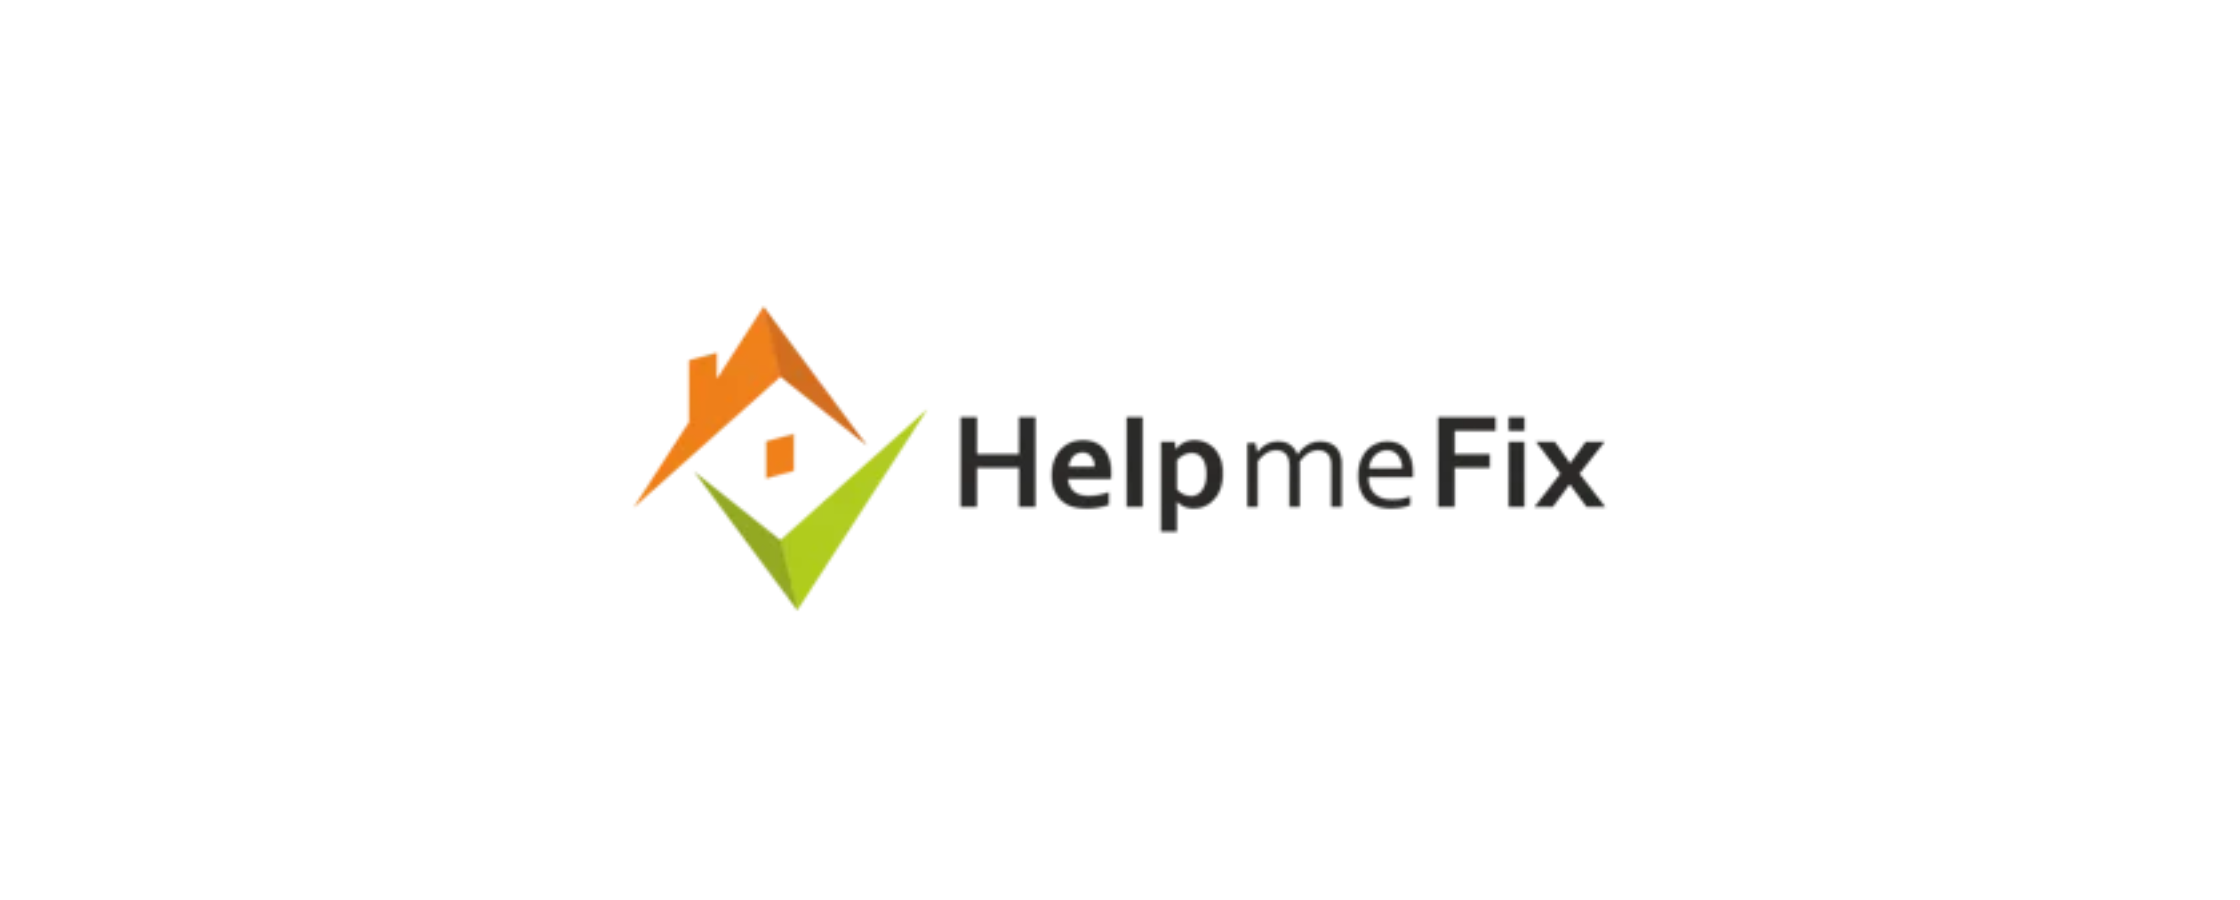 Behind the Scenes: We sat down with Derek Turney, Enterprise Account Executive at Help me Fix, to talk about our out-of-hours maintenance support service.